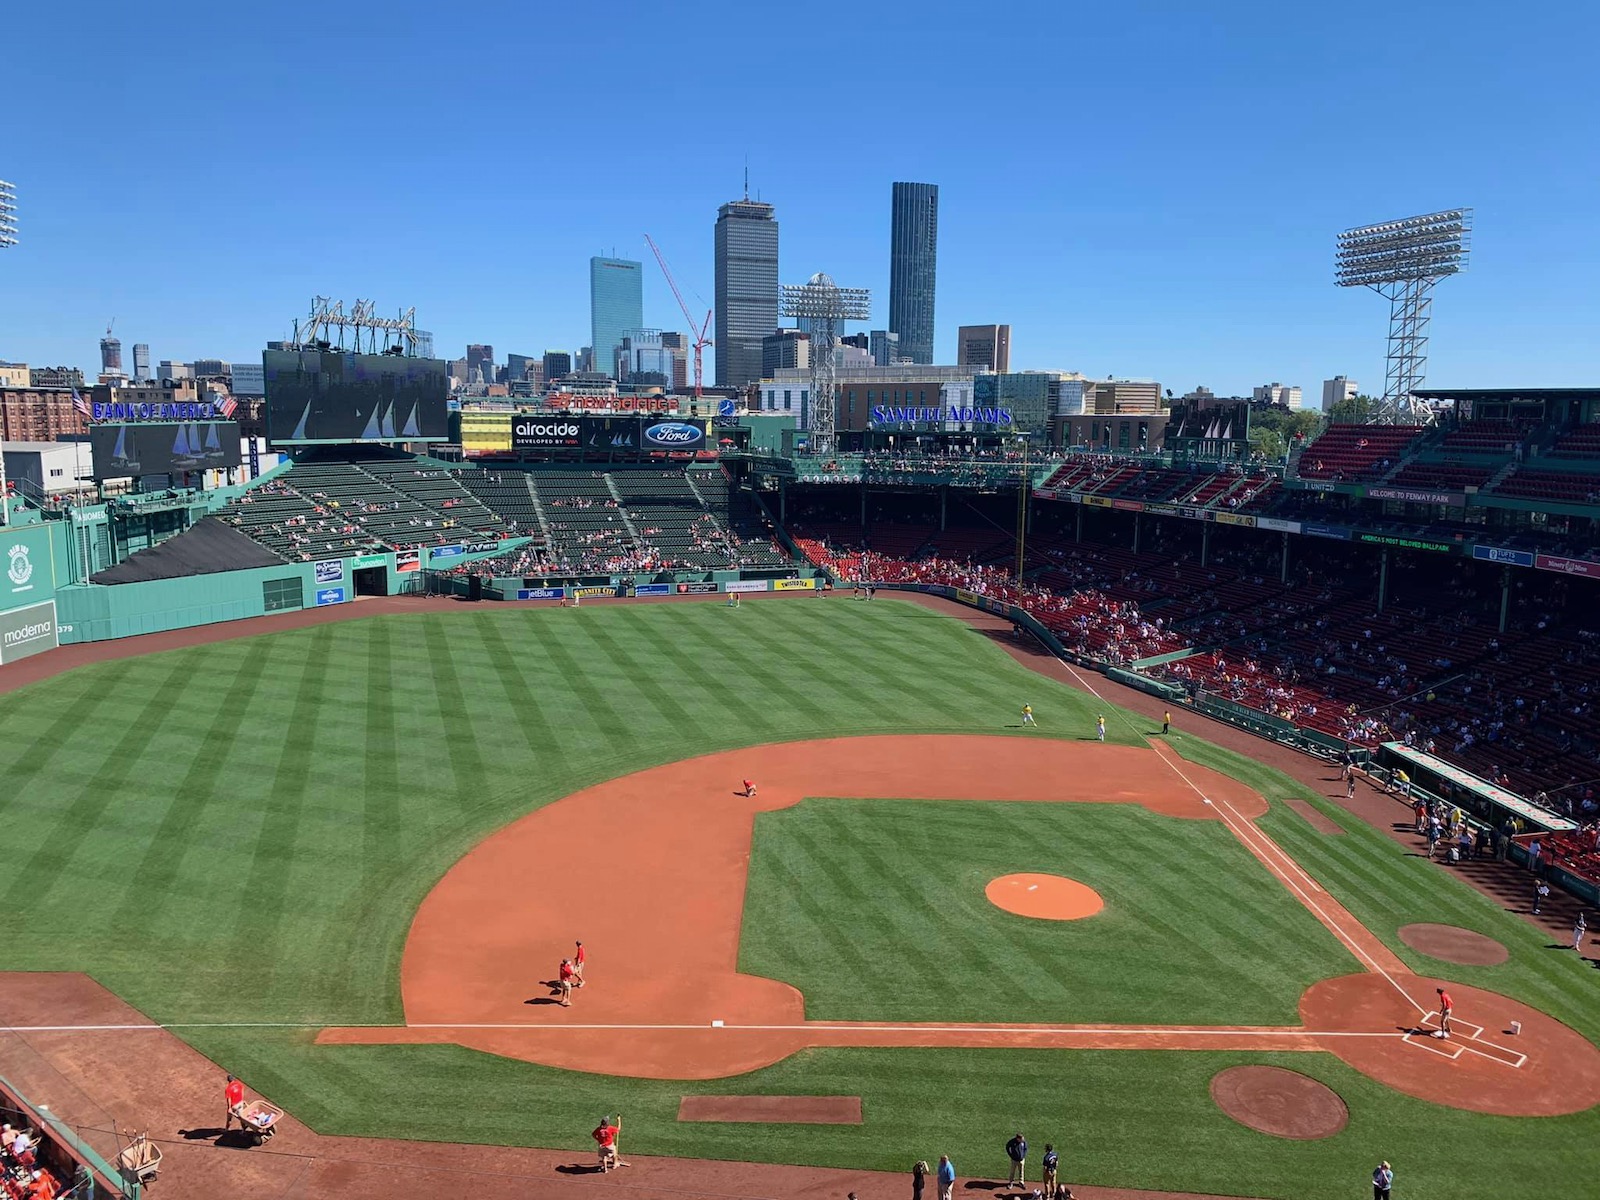 Watch: Ball gets lodged in light in Fenway Park's Green Monster